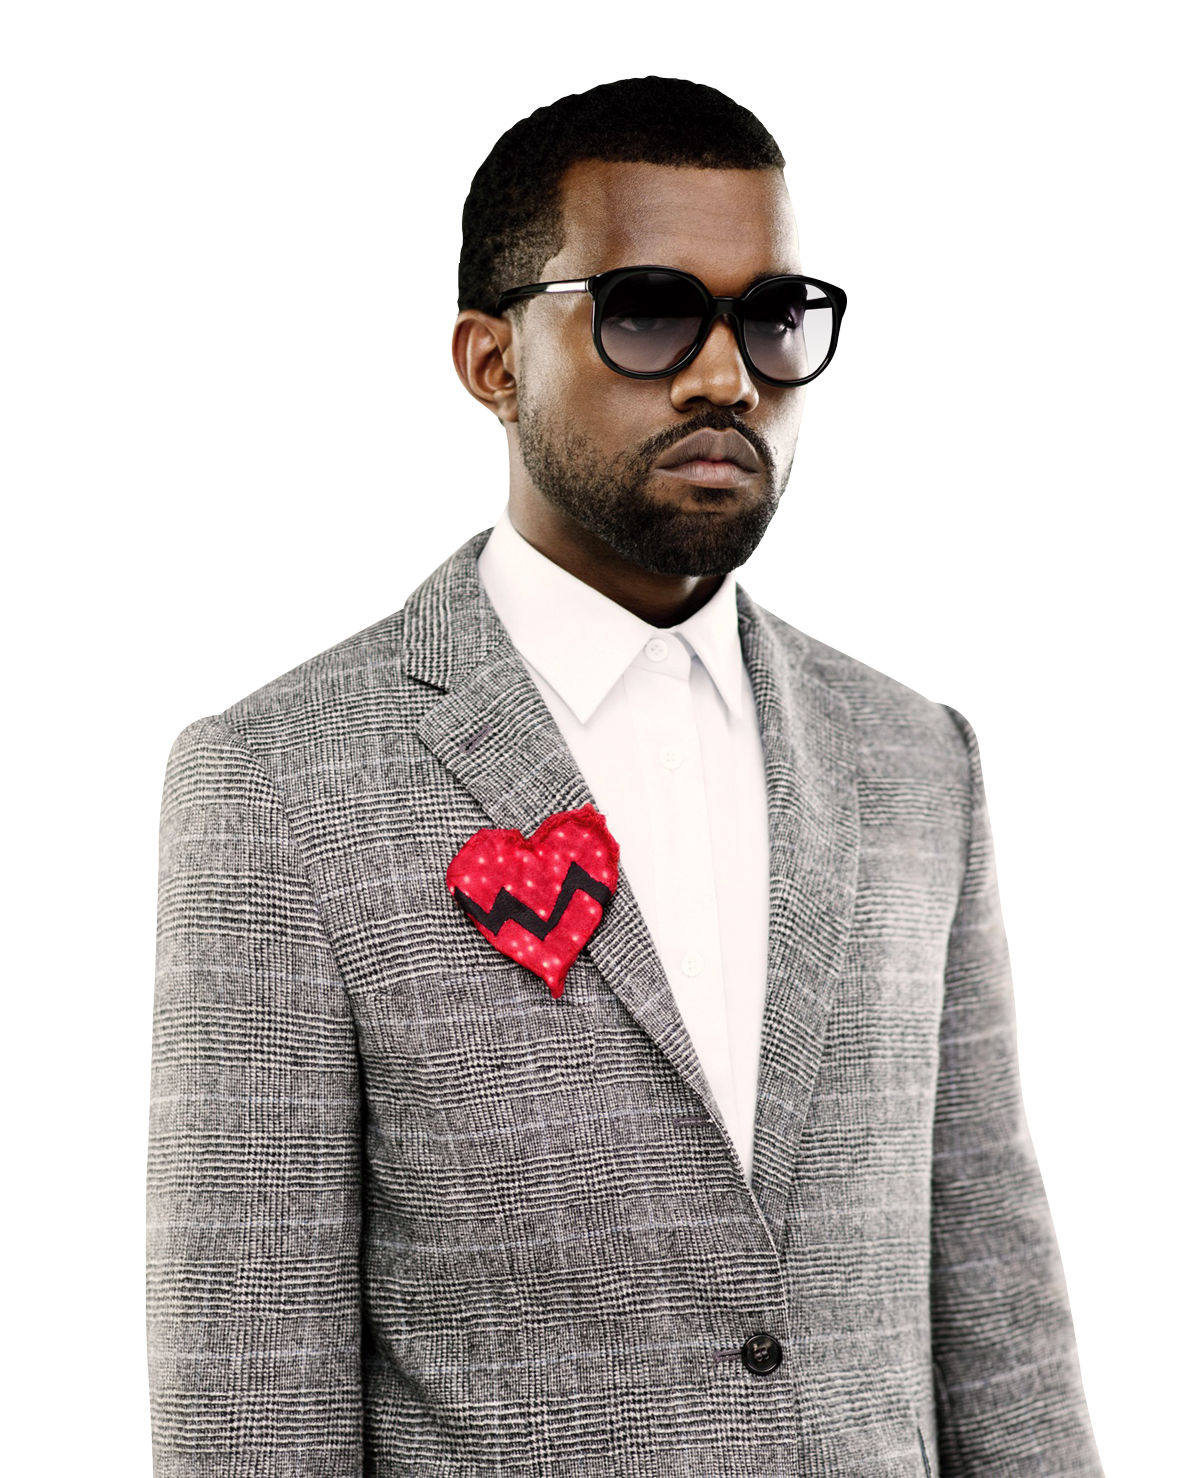 West Wallpaper Video High-Definition Kanye 1080P Clipart